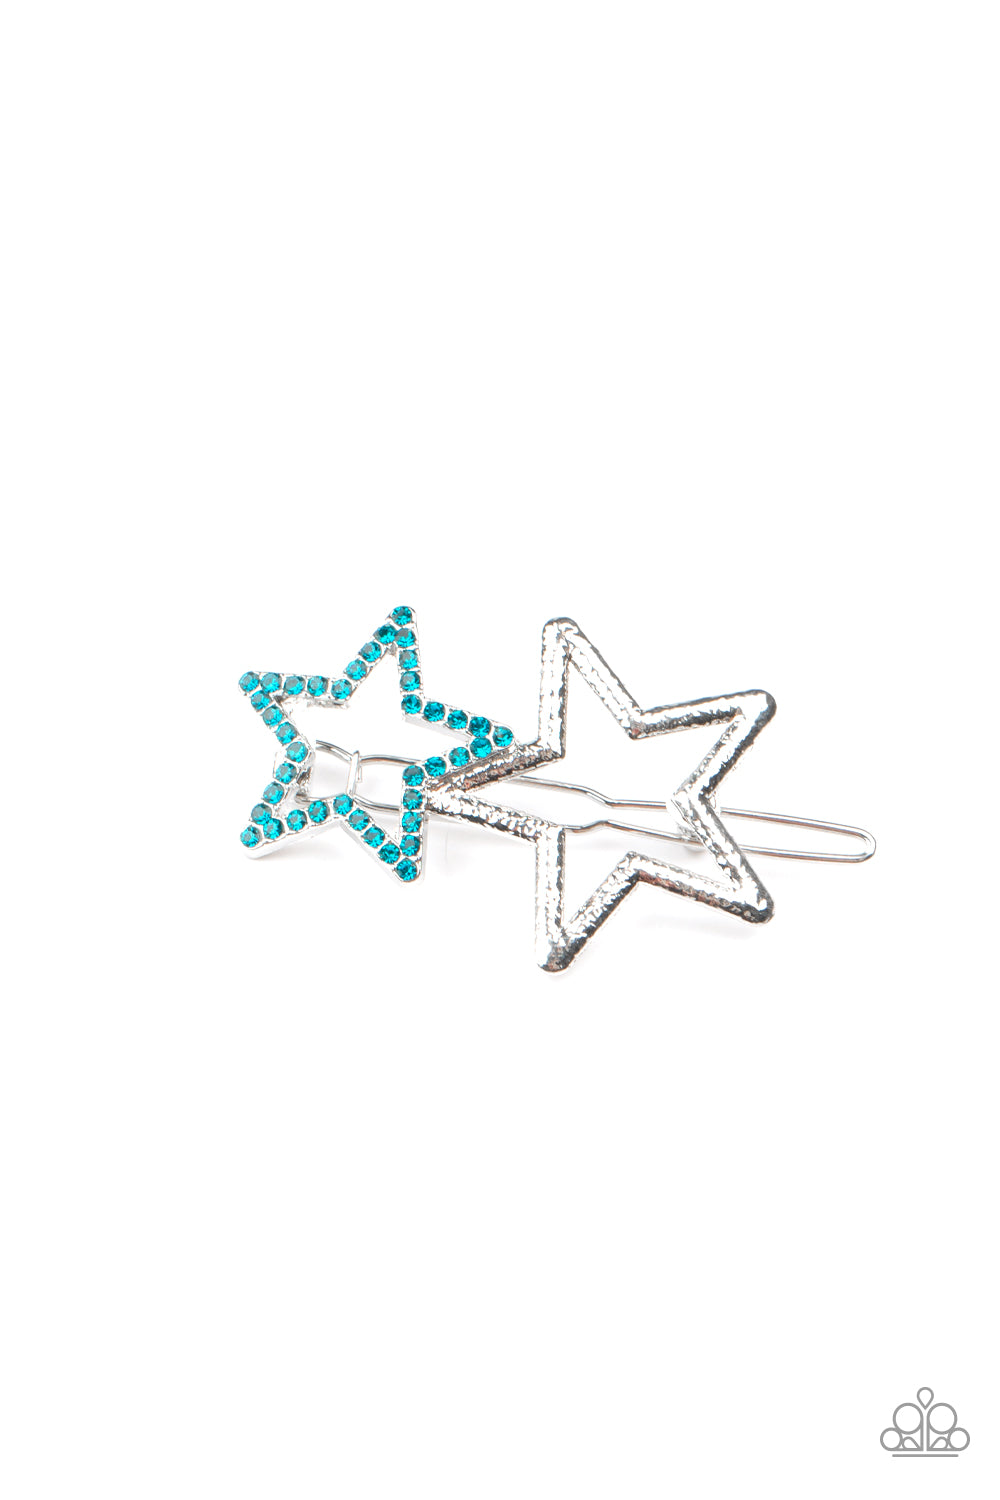 Lets Get This Party STAR-ted! - Blue Paparazzi Jewelry